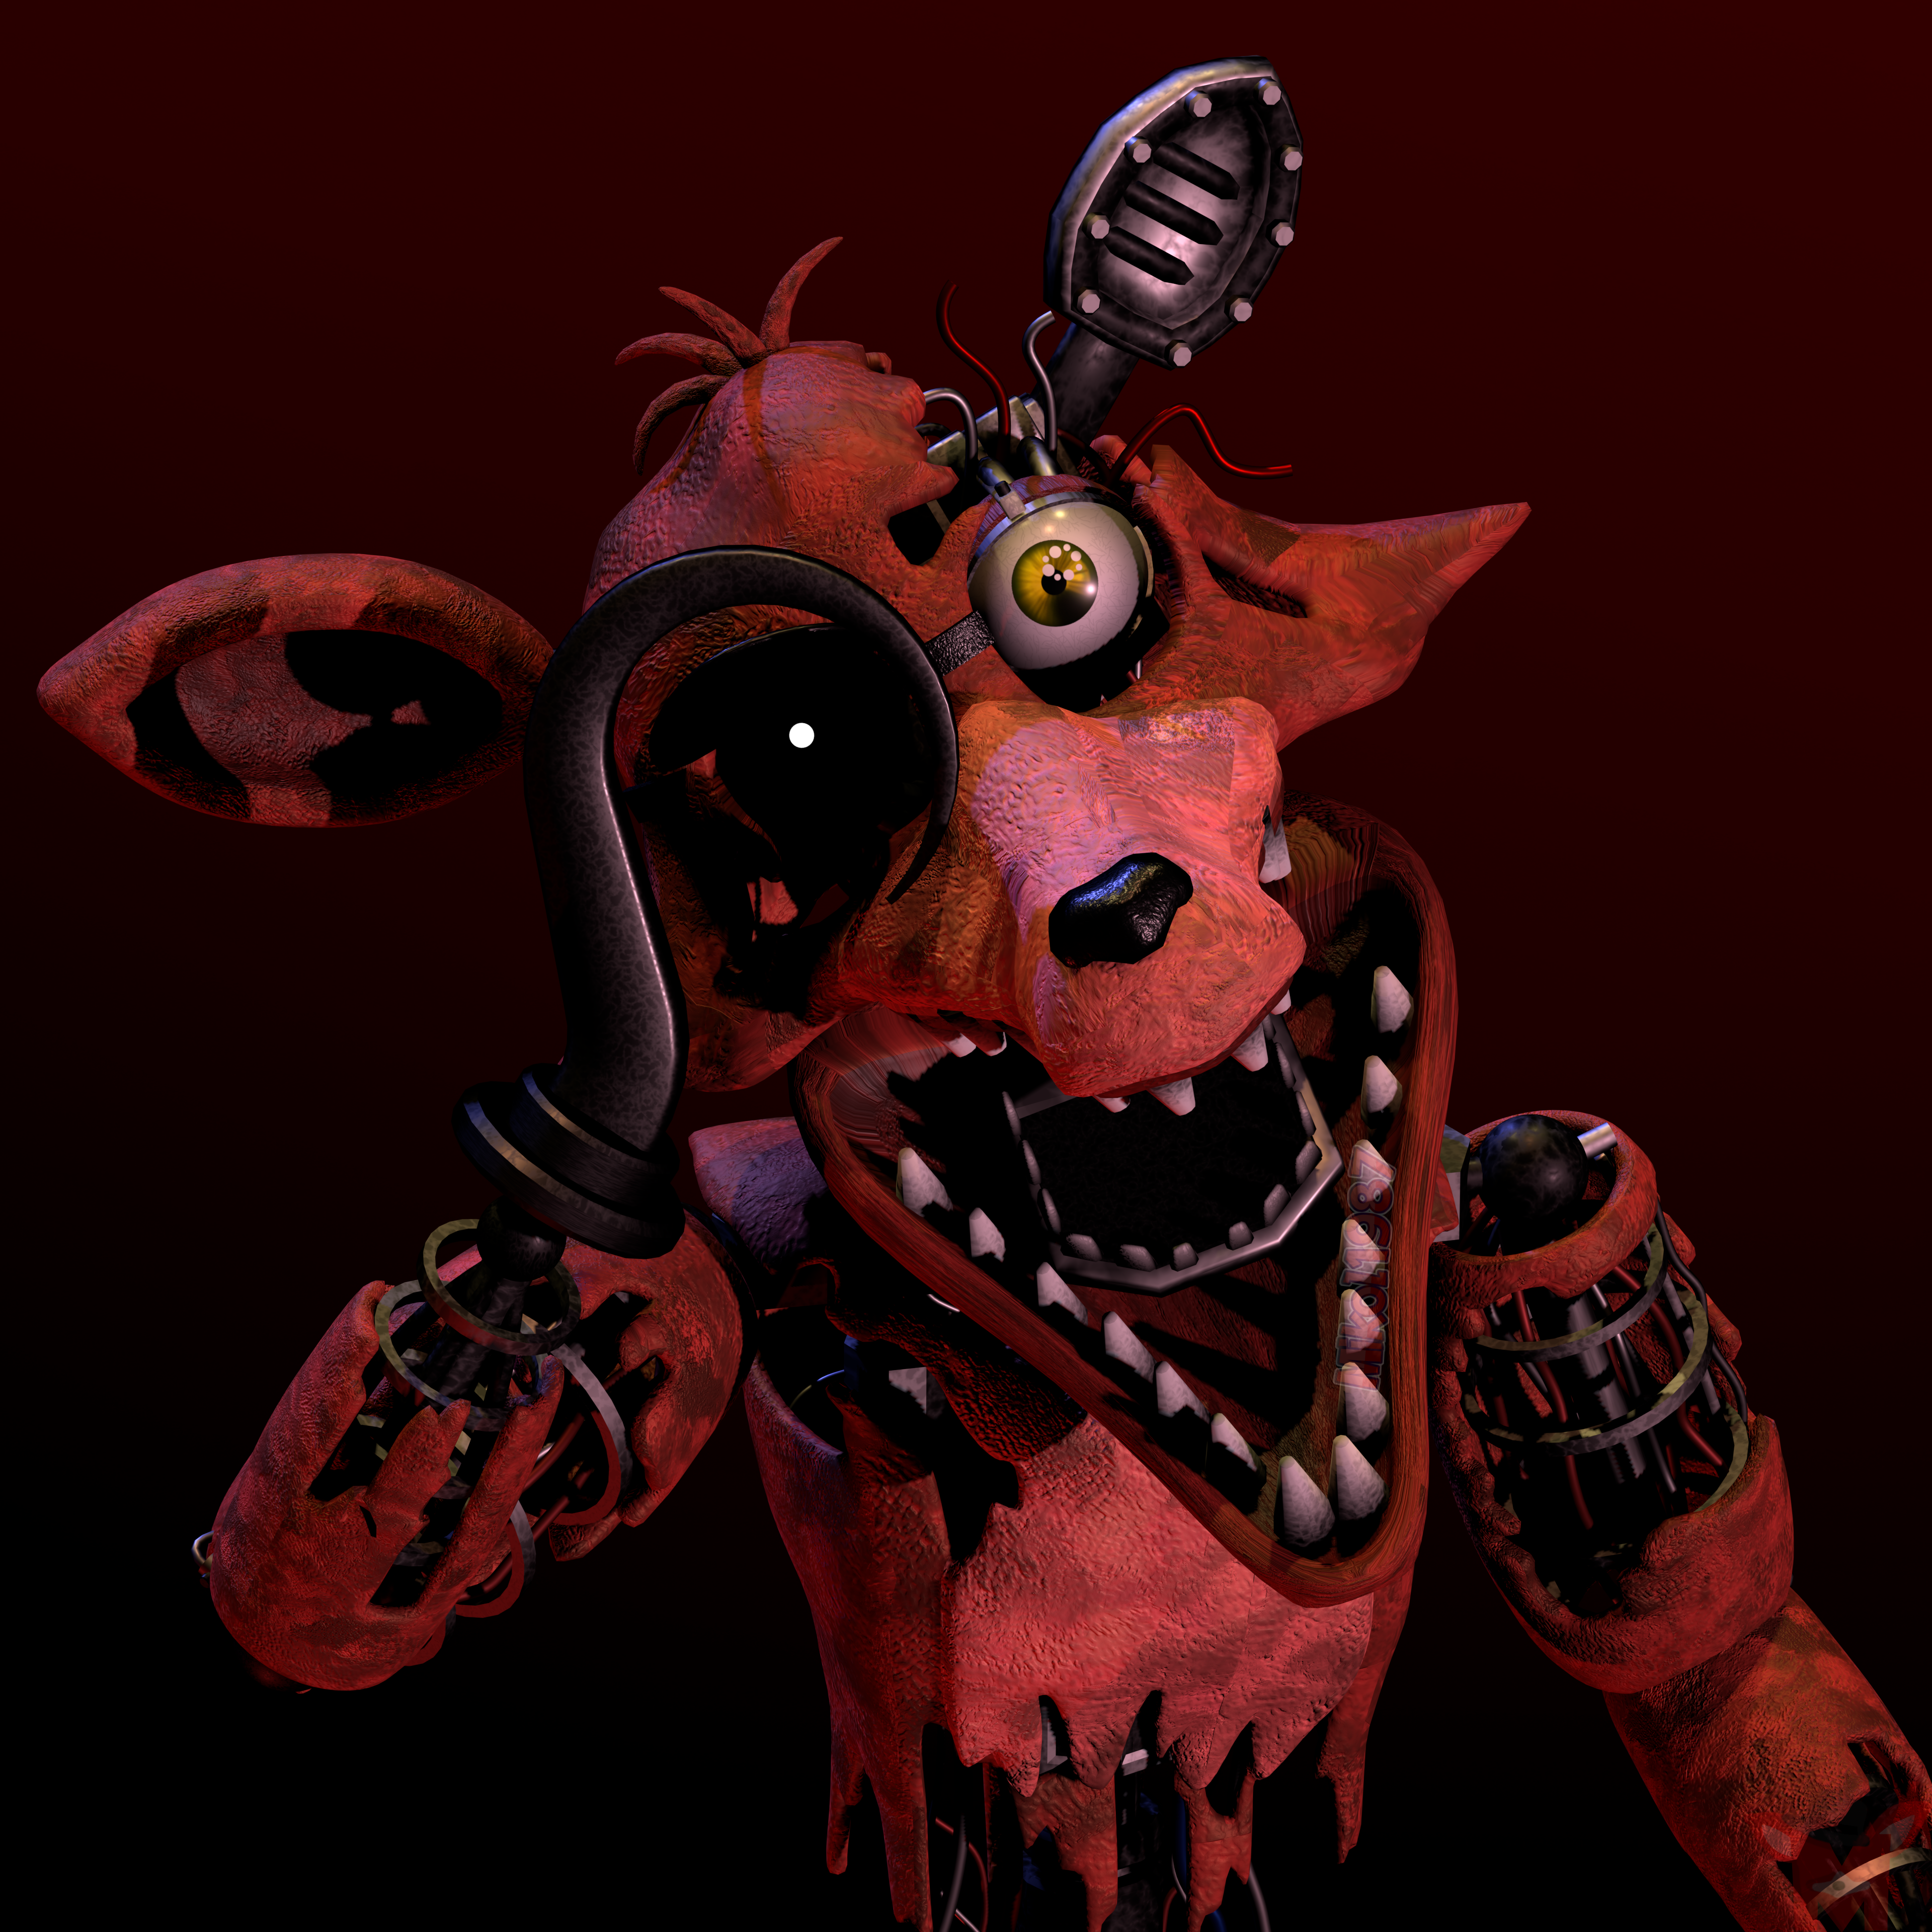 Stylized Withered Foxy- (FNaF2) by Theyseemerollan on DeviantArt